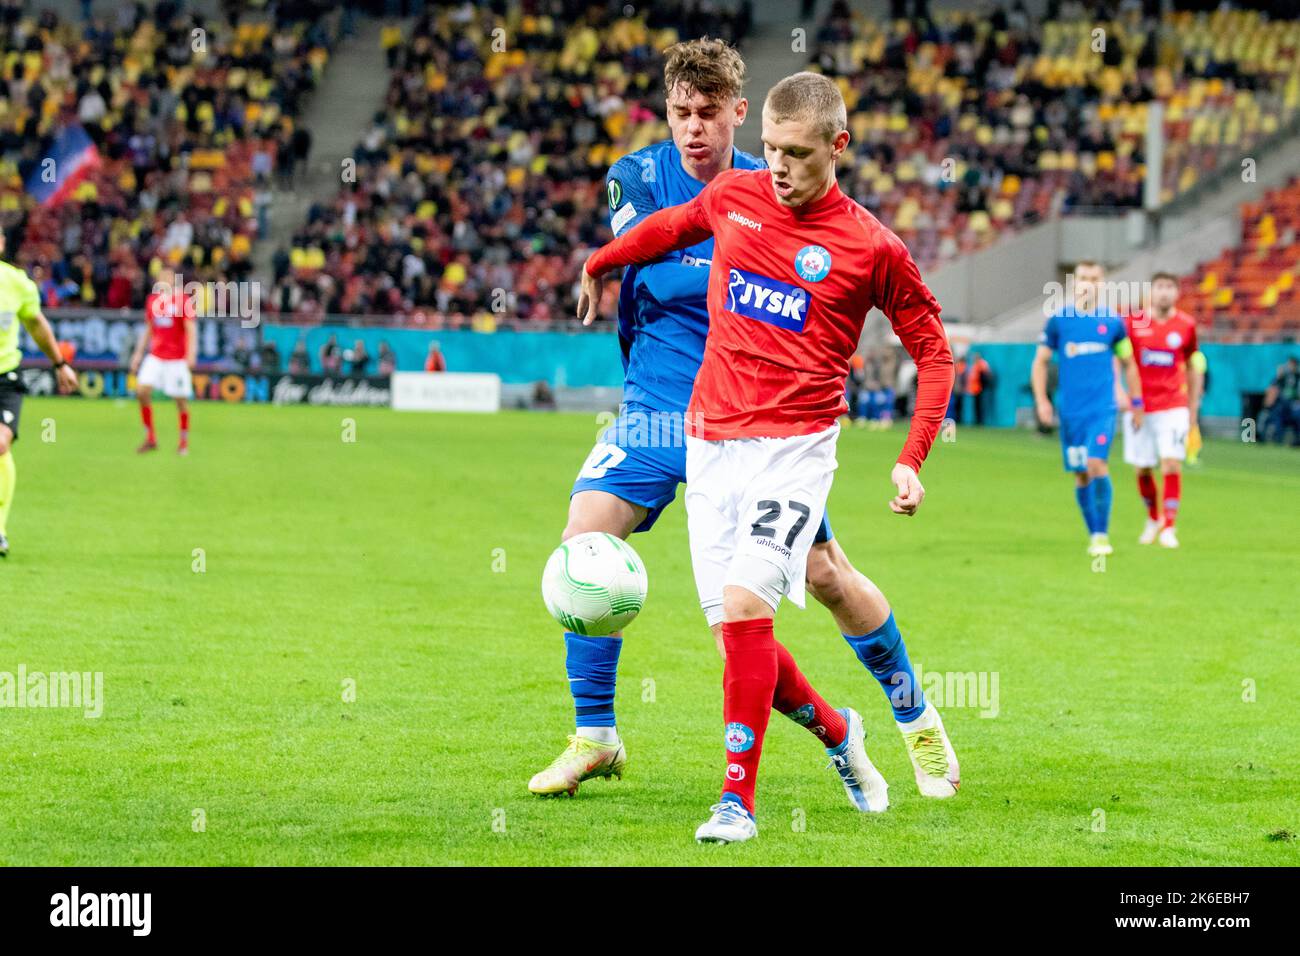 Bucharest, Romania. 14th Oct, 2022. October 14, 2022: Sebastian Jorgensen #27 of Silkeborg IF and Octavian Popescu #10 of FCSB during of the UEFA Europa Conference League group B match between FCSB Bucharest and Silkeborg IF at National Arena Stadium in Bucharest, Romania ROU. Catalin Soare/Cronos Credit: Cronos/Alamy Live News Stock Photo